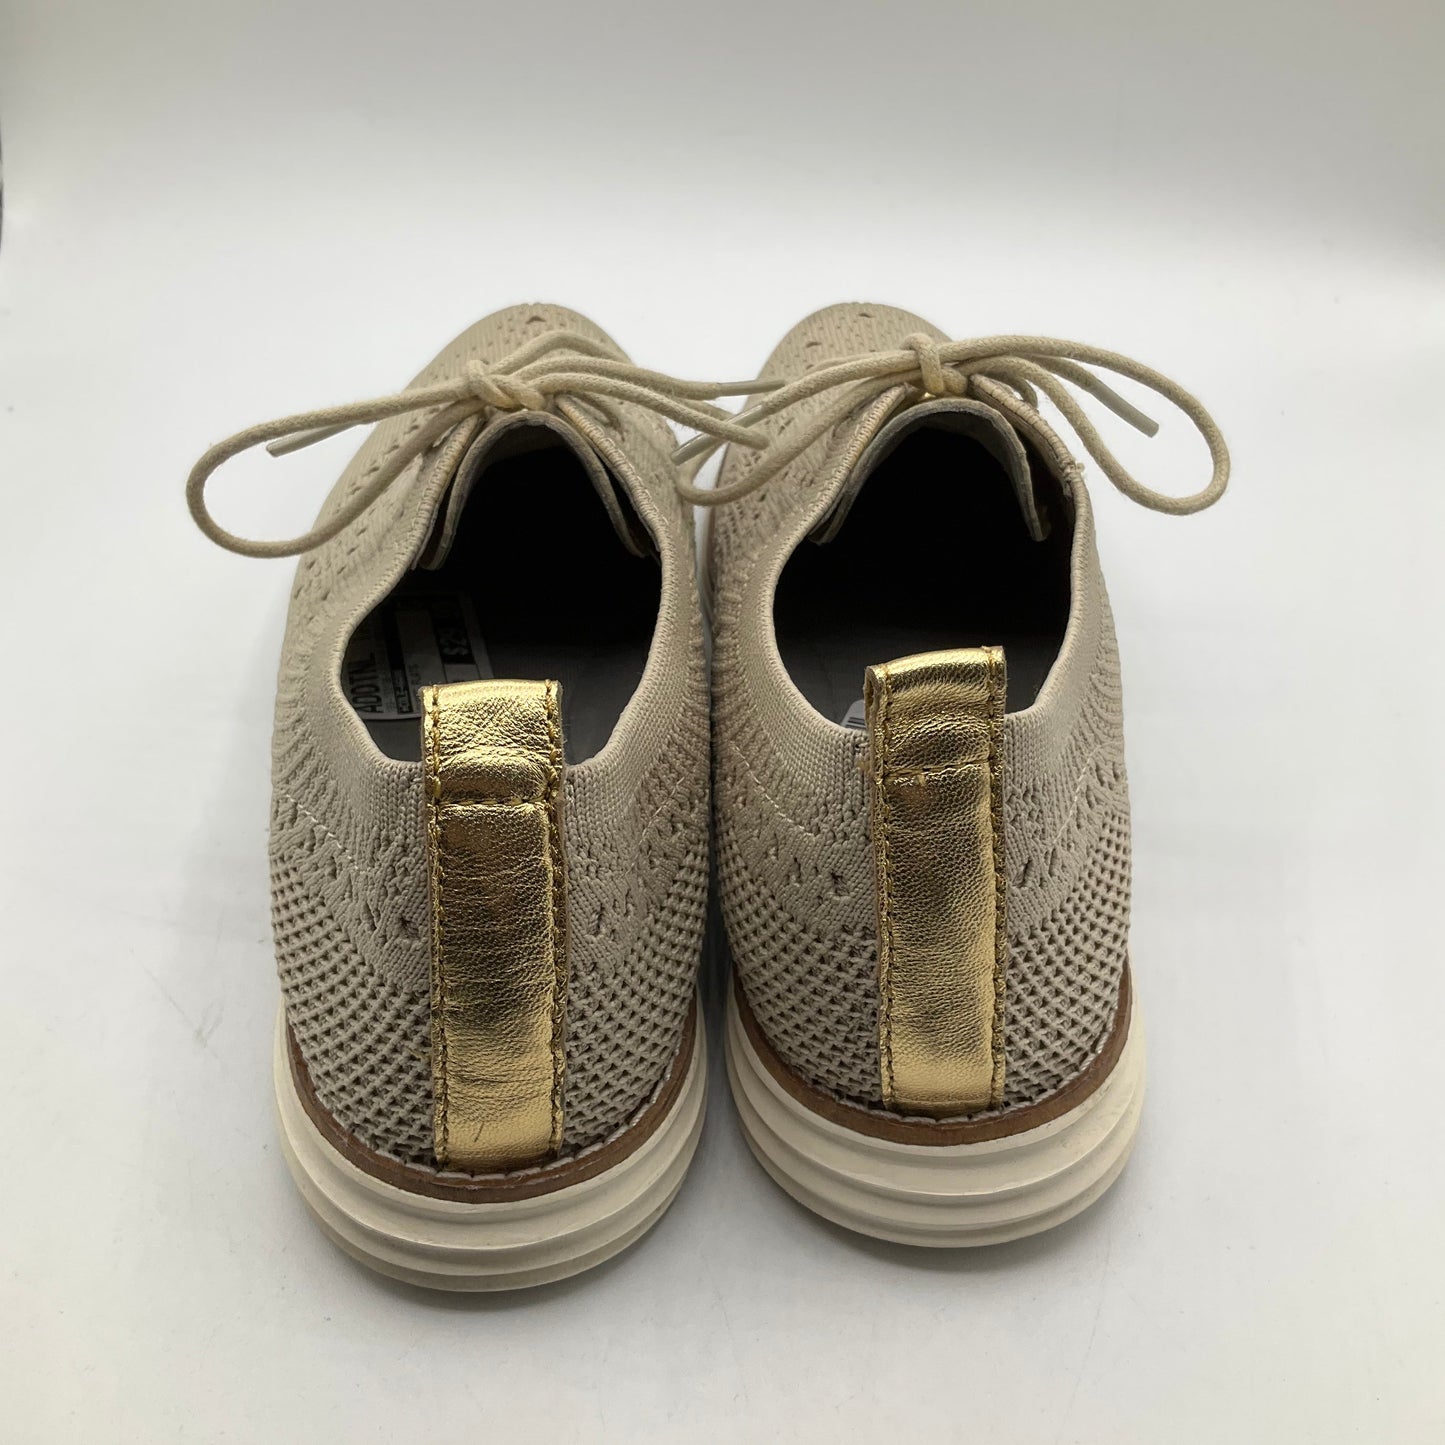 Tan Shoes Flats Cole-haan, Size 7.5